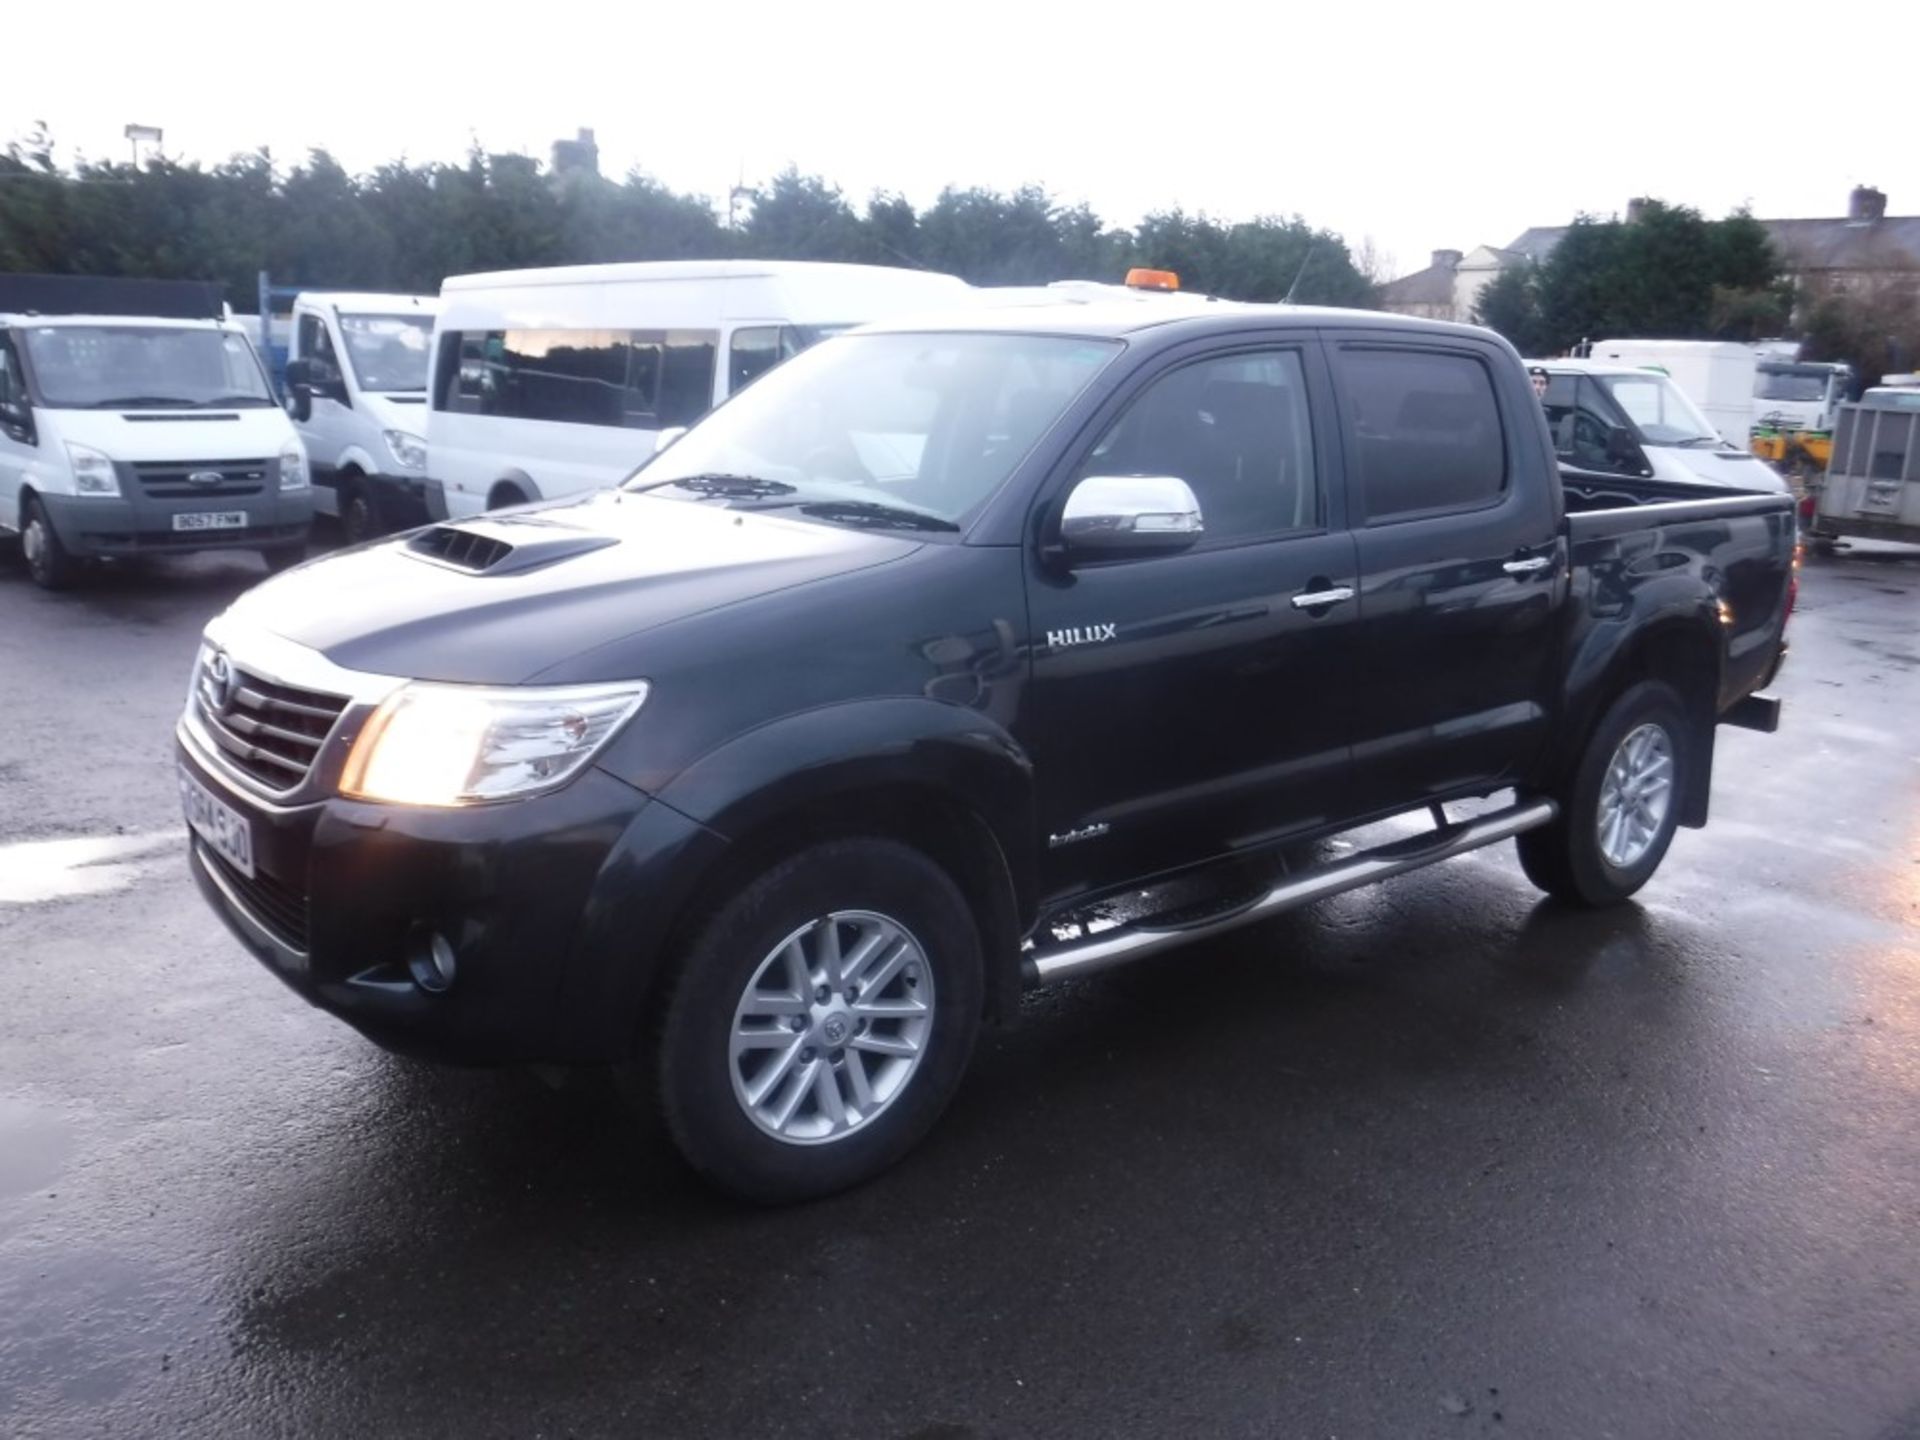 64 reg TOYOTA HI-LUX INVINCIBLE D-4D 4 X 4, 1ST REG 12/14, 48121M WARRANTED, V5 HERE, 1 OWNER FROM - Image 2 of 5